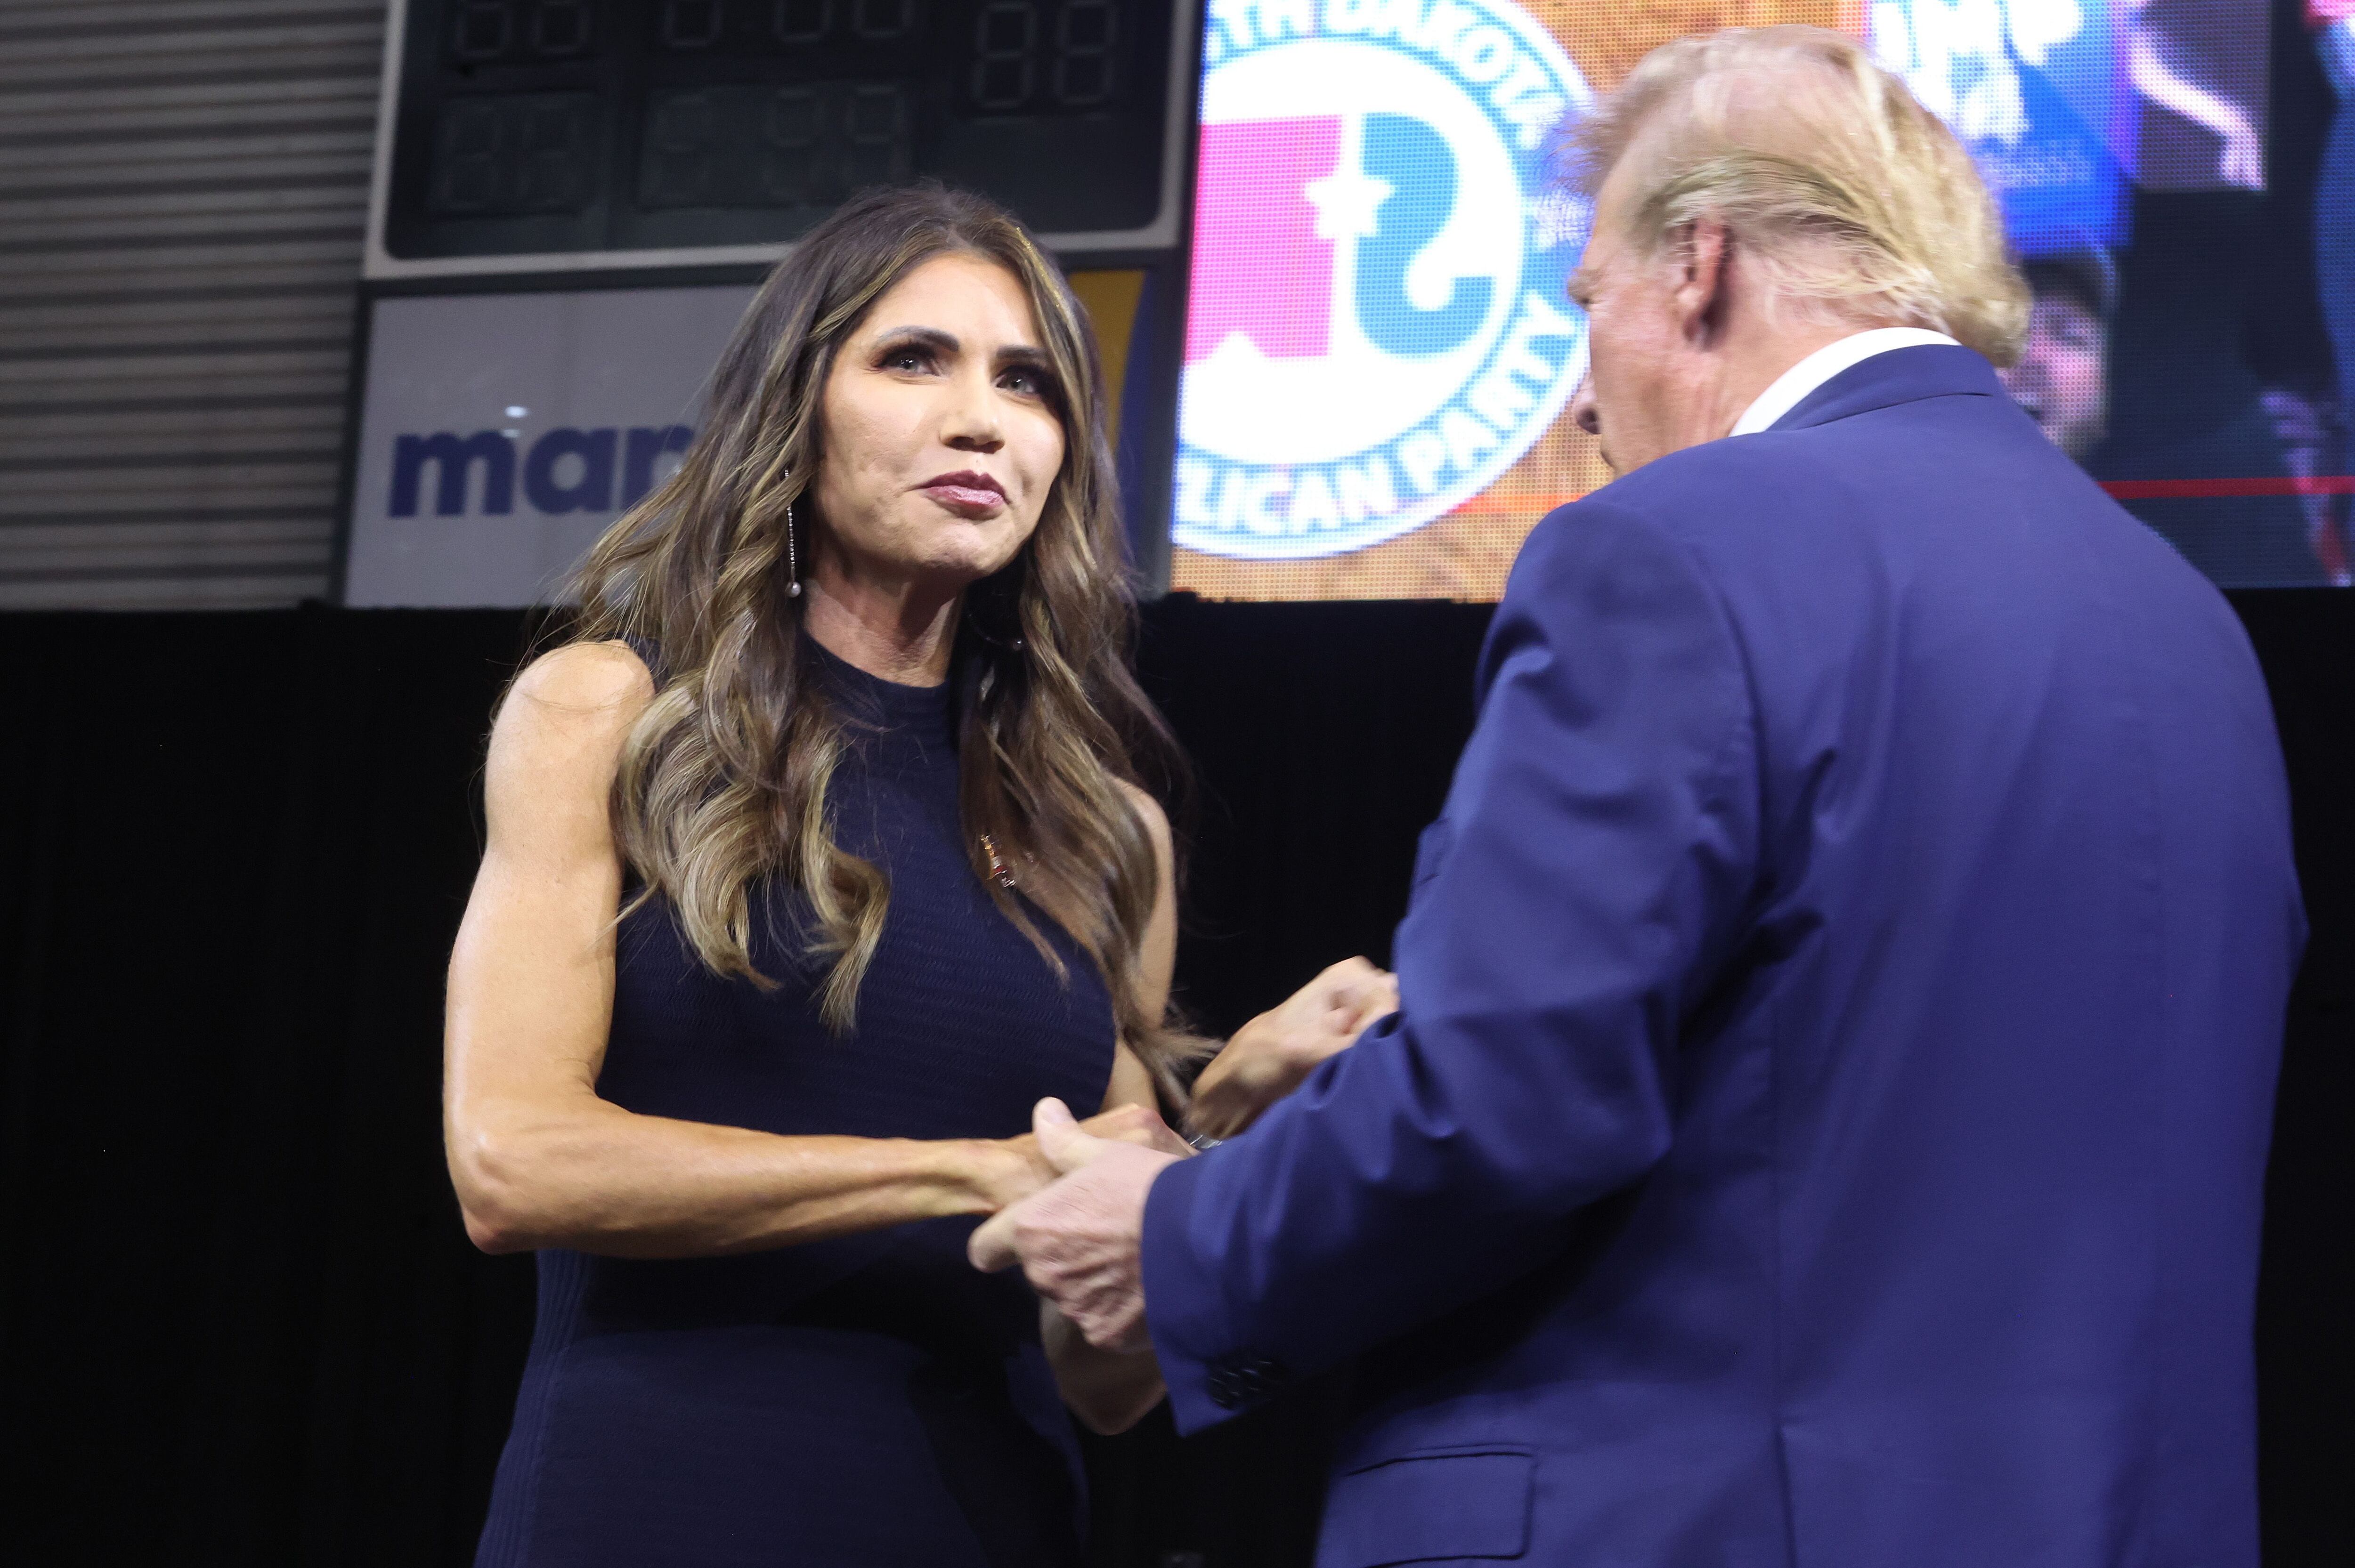 Former President Donald Trump greets South Dakota Gov. Kristi Noem at a rally hosted by the South Dakota Republican Party on Sept. 8 in Rapid City, S.D.